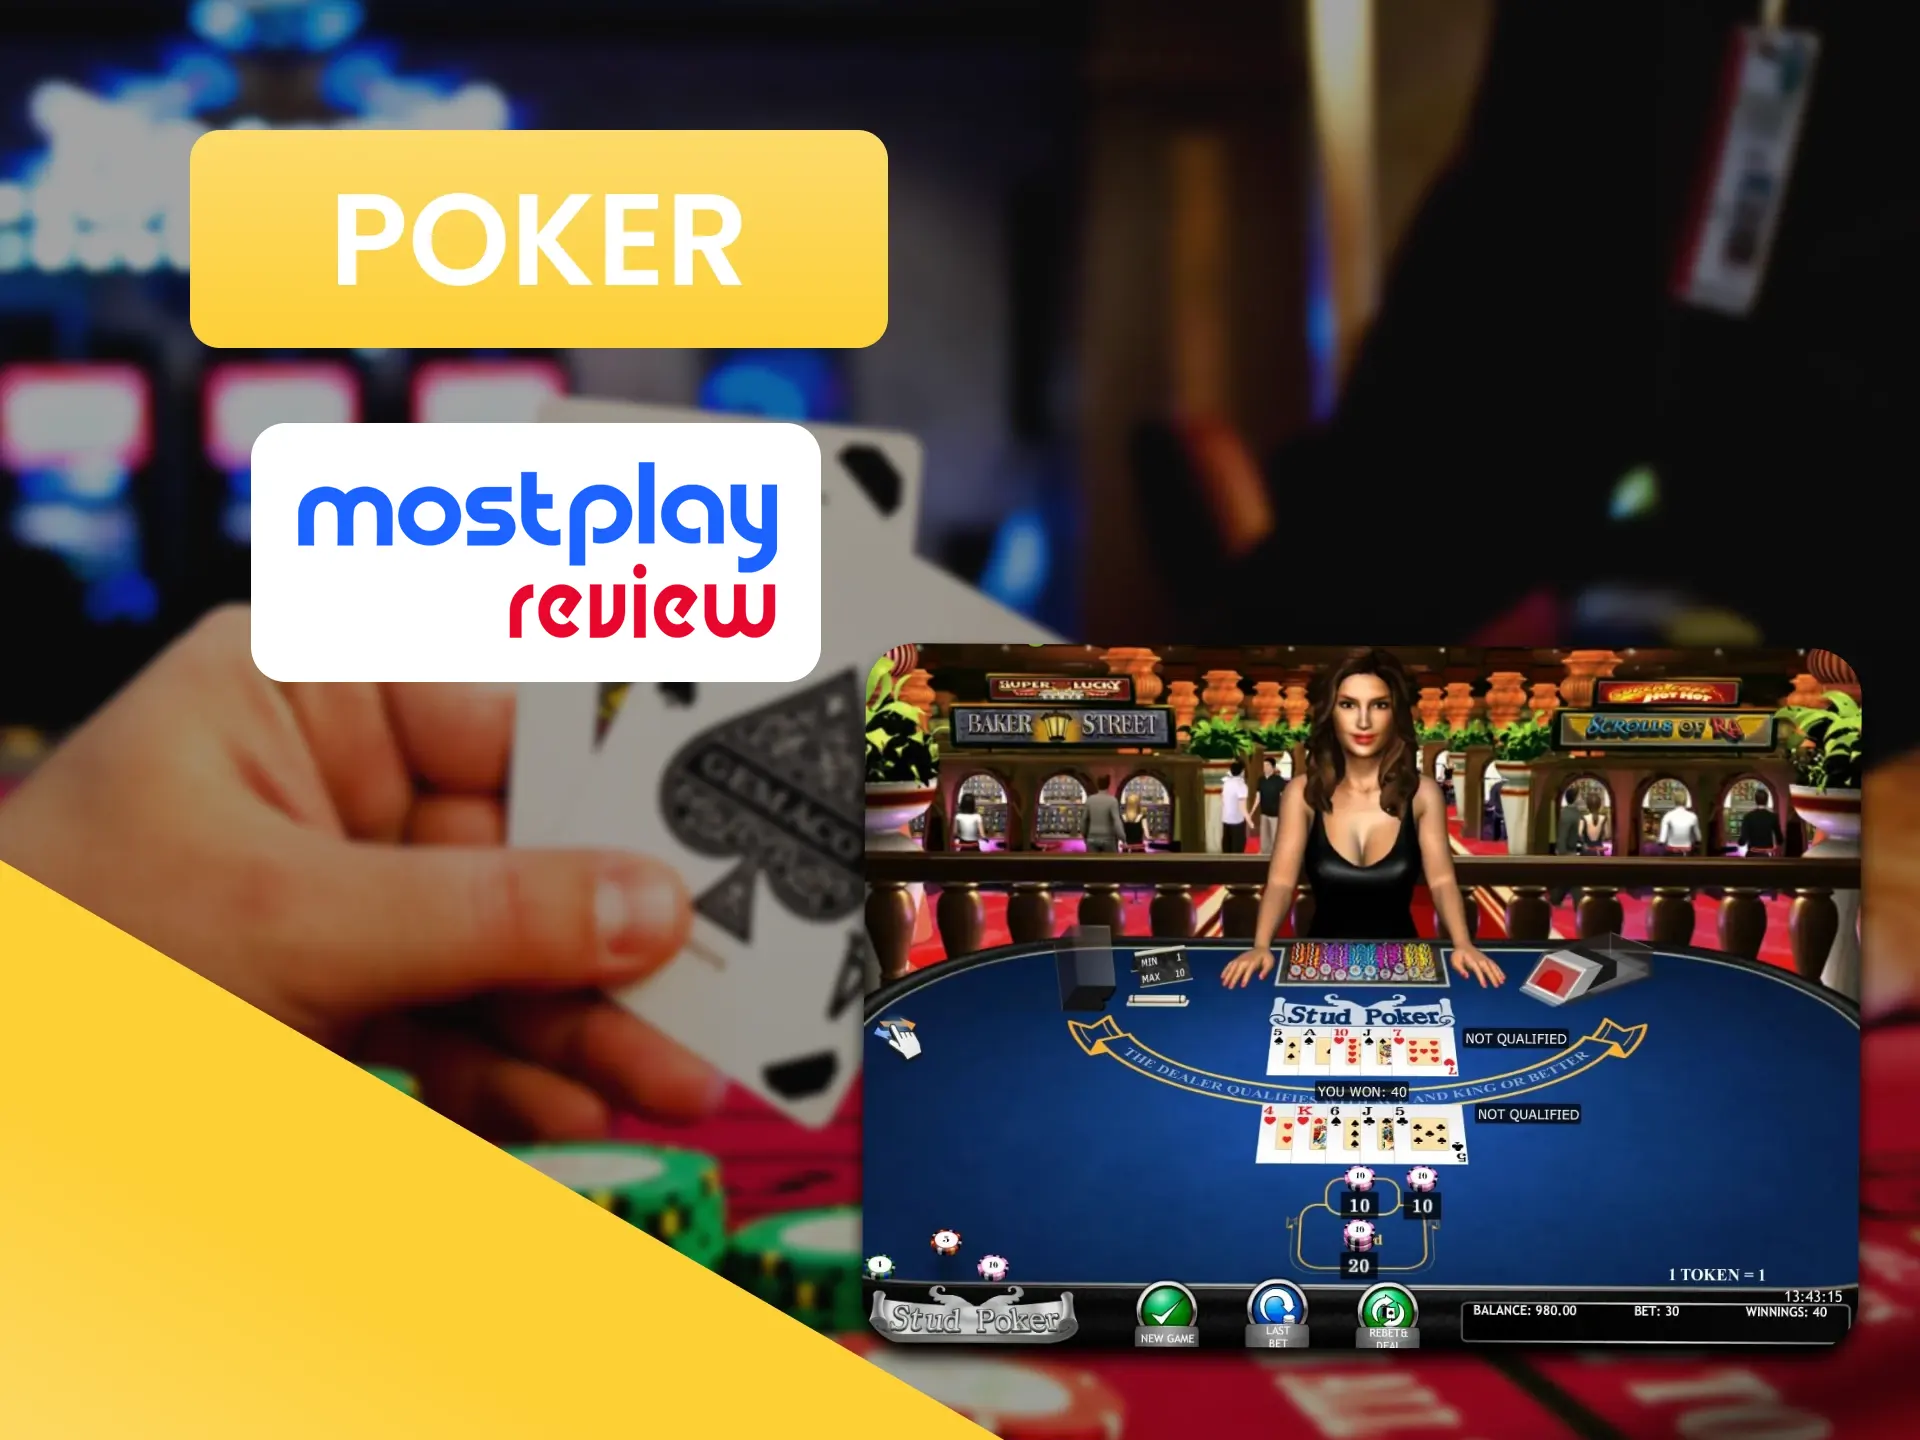 Play poker at the Mostplay casino.